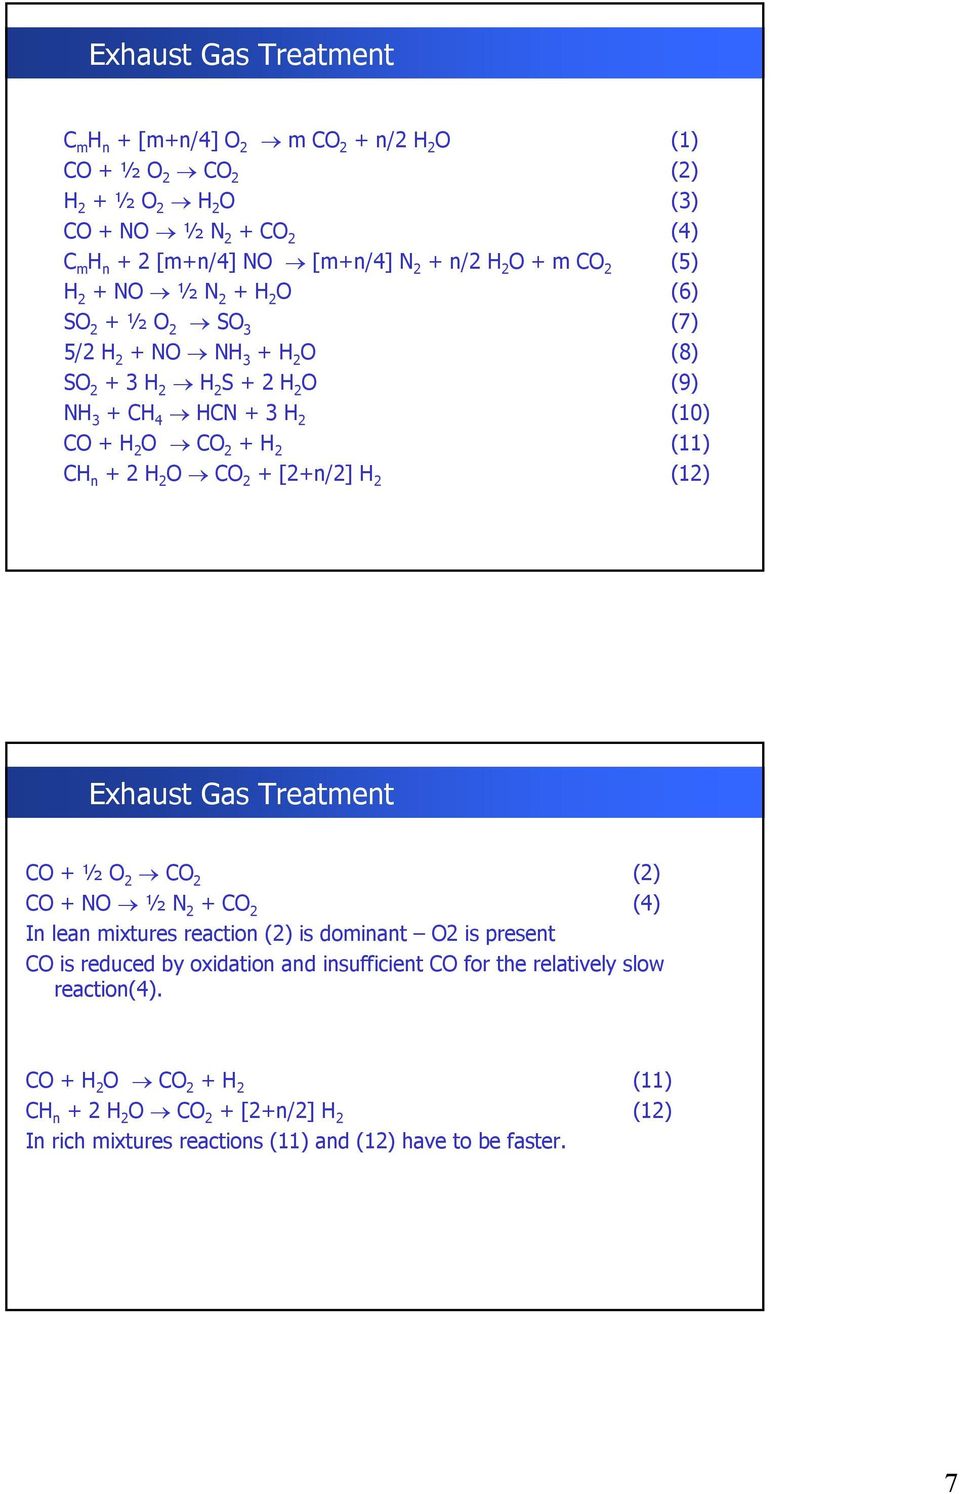 + 2 H 2 O CO 2 + [2+n/2] H 2 (12) Exhaust Gas Treatment CO + ½ O 2 CO 2 (2) CO + NO ½N 2 + CO 2 (4) In lean mixtures reaction (2) is dominant O2 is present CO is reduced by oxidation